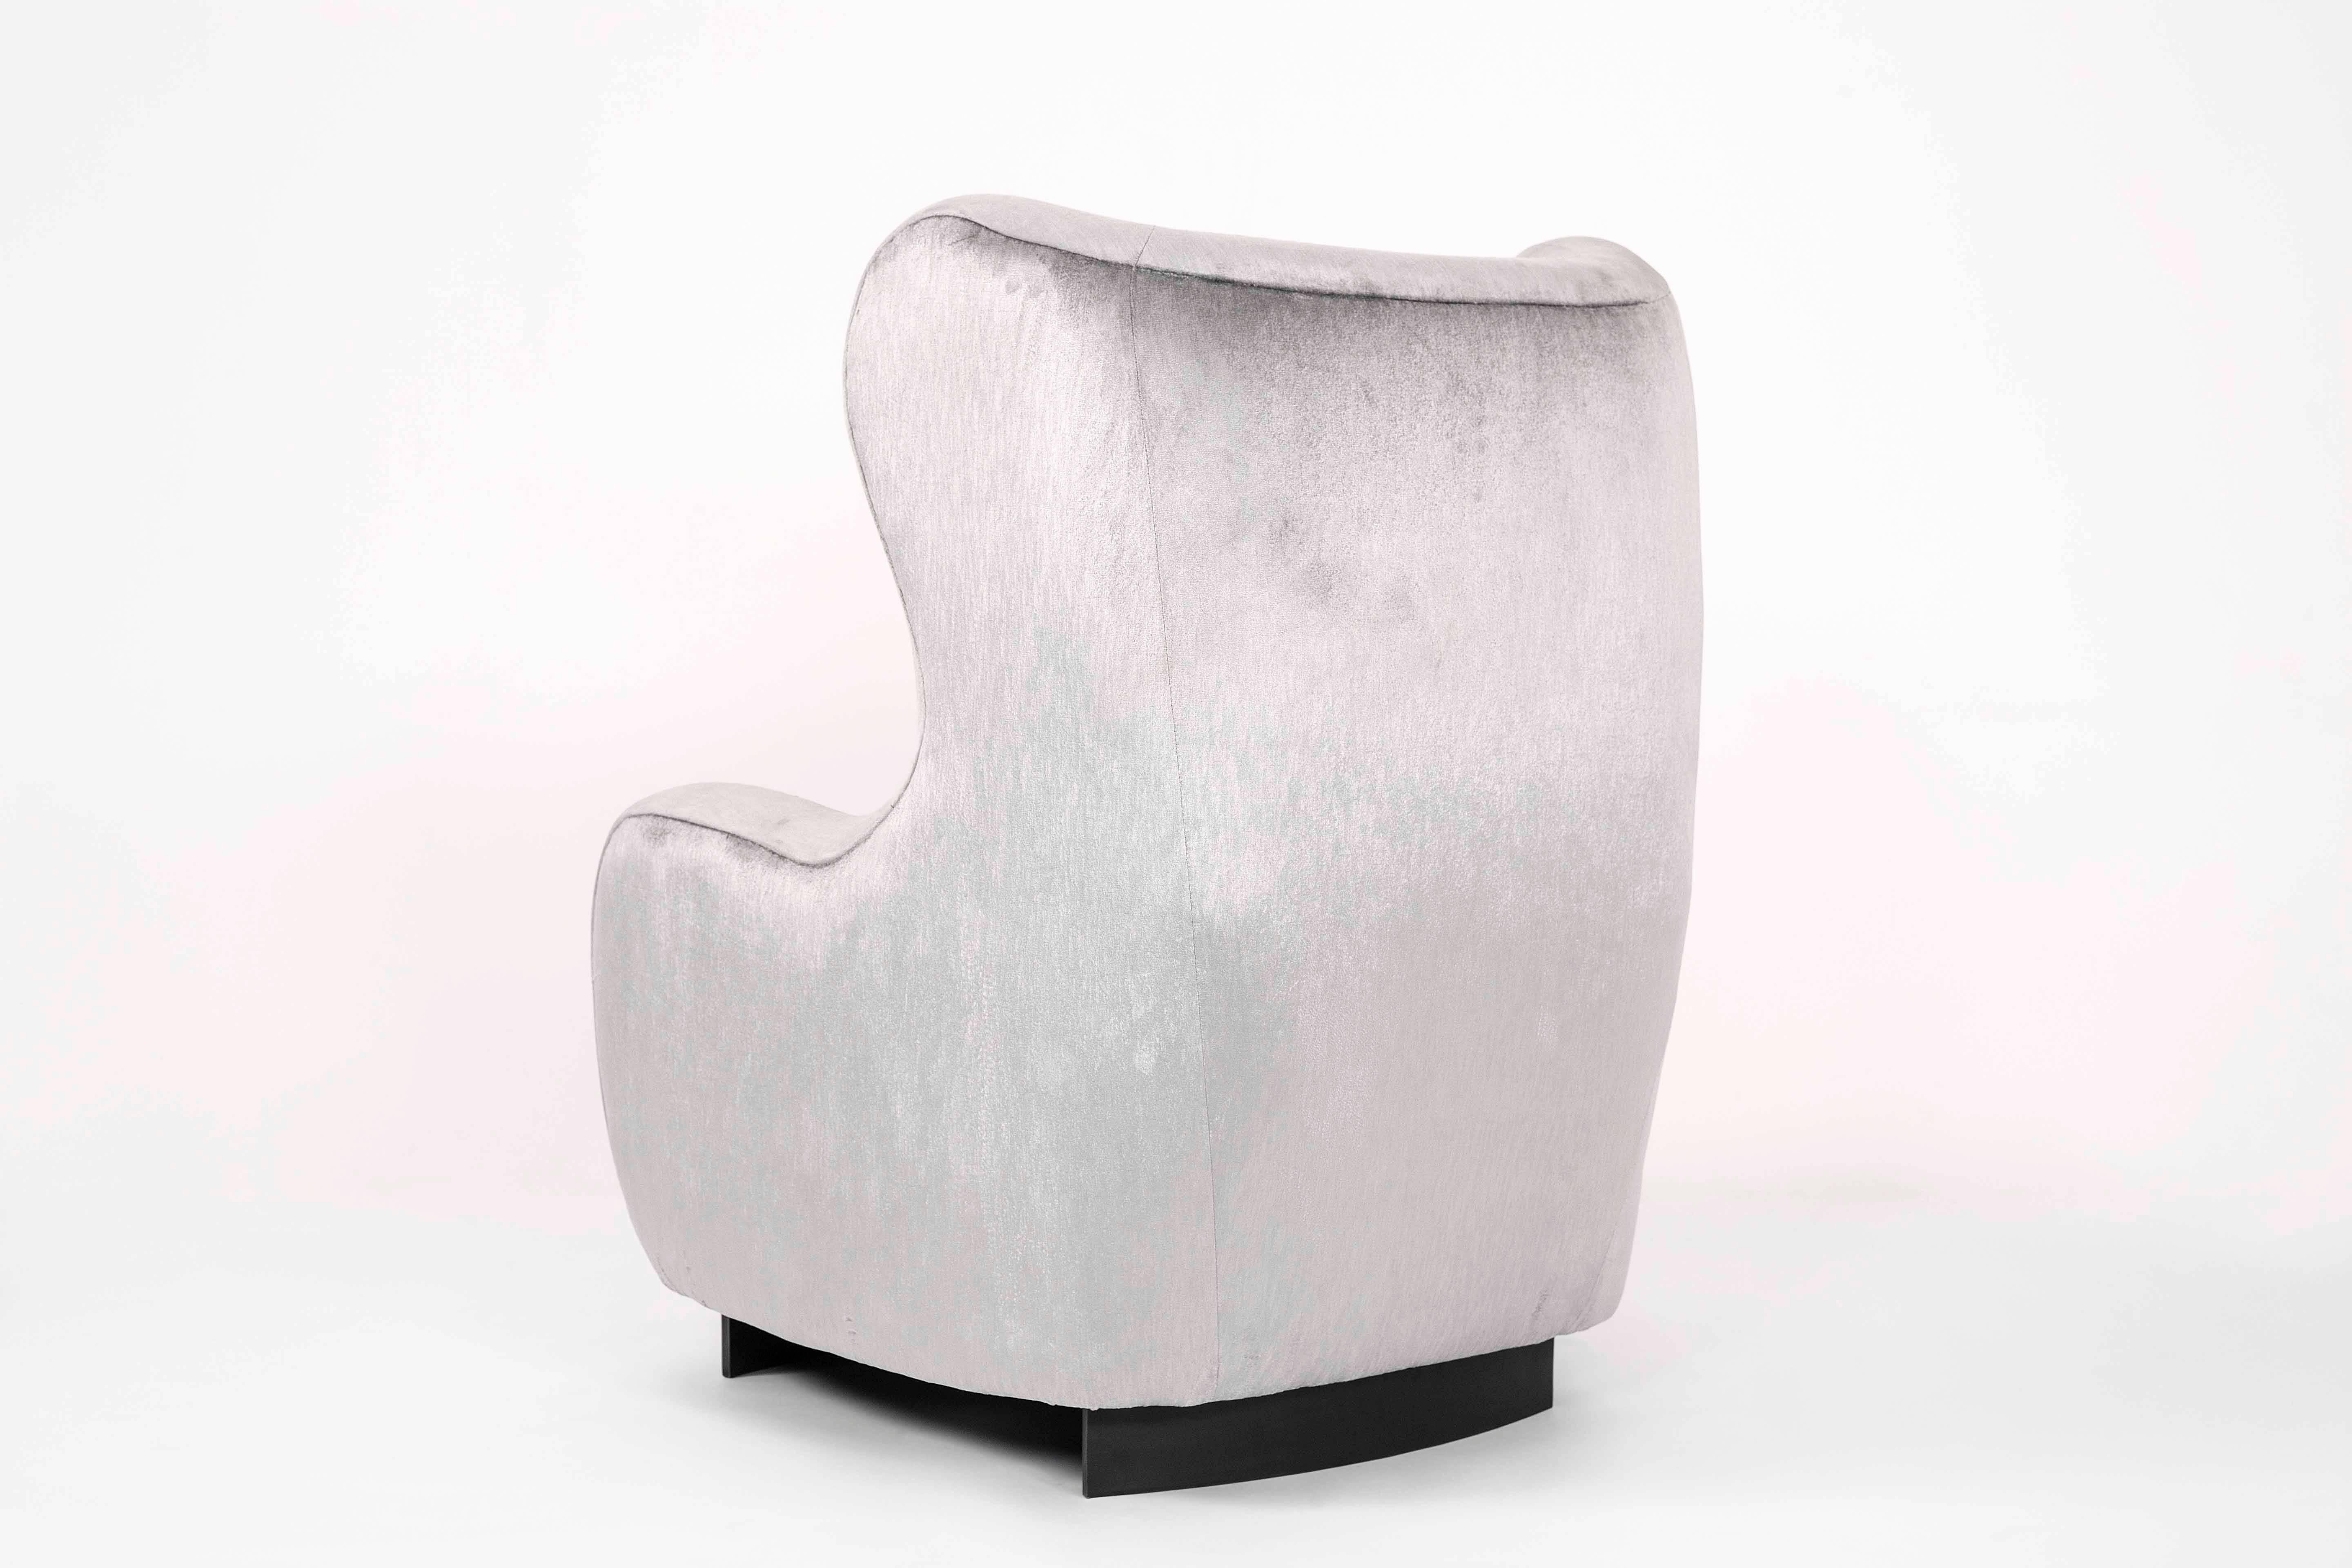 The Corbridge armchair is an oversized statement piece, solid and protective yet elegant and curved. Designed to give the user the feeling of being enveloped in comfort, the chair both feminine in shape but masculine in size. Corbridge refers to the